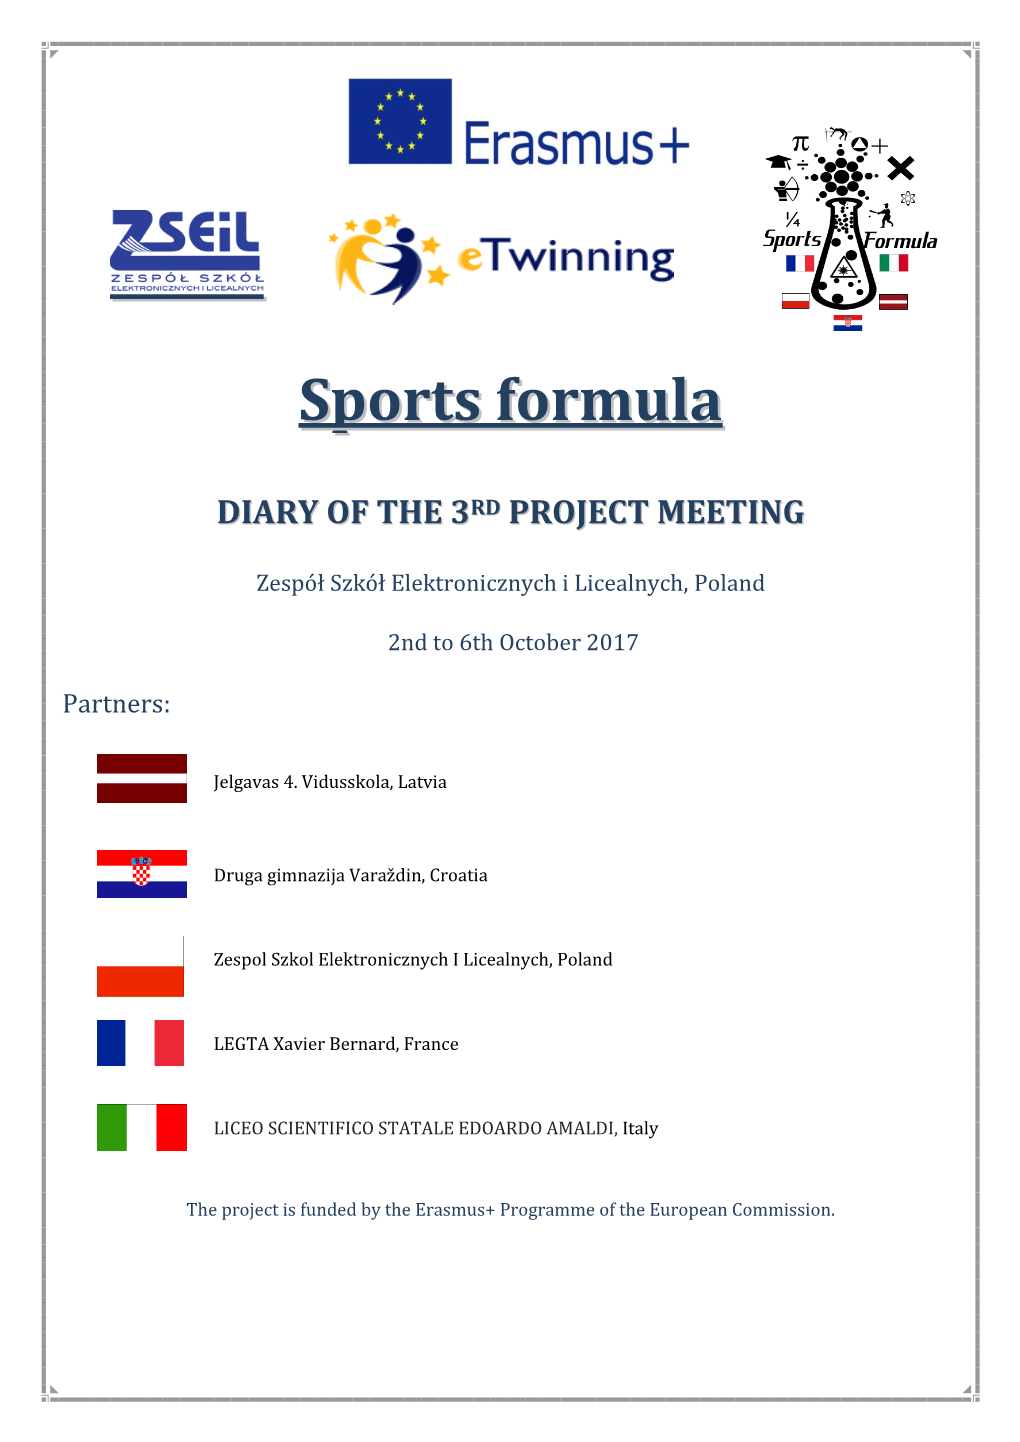 Sports Formula Meeting in Poland